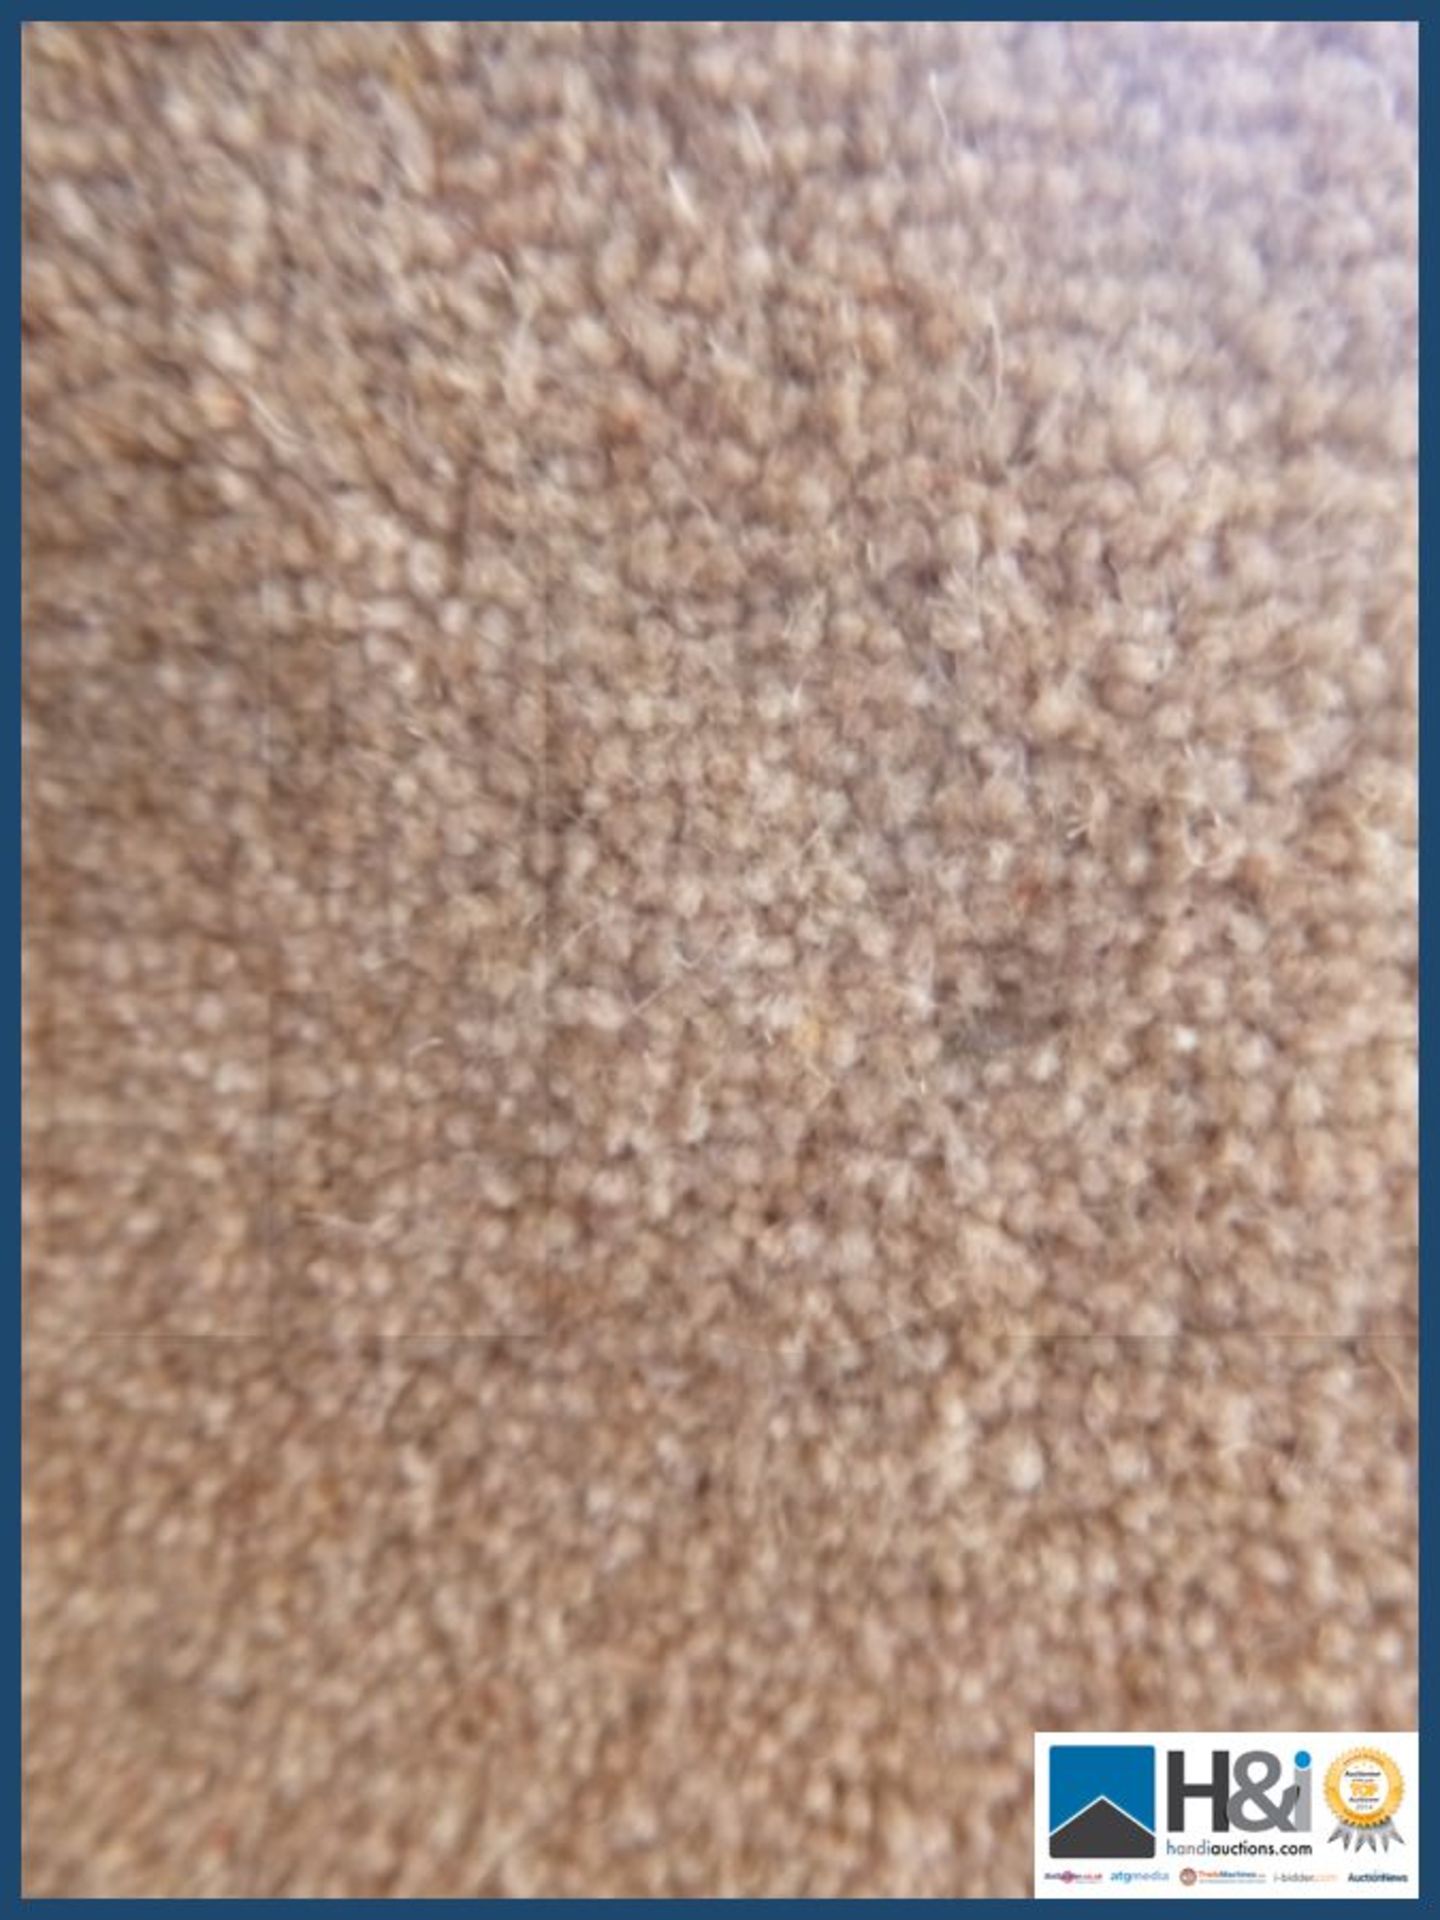 Approx 4m X 3.2m Colour Honey oatmeal 80% wool 50 Oz pile weight heavy wear. RRP GBP 25 per square m